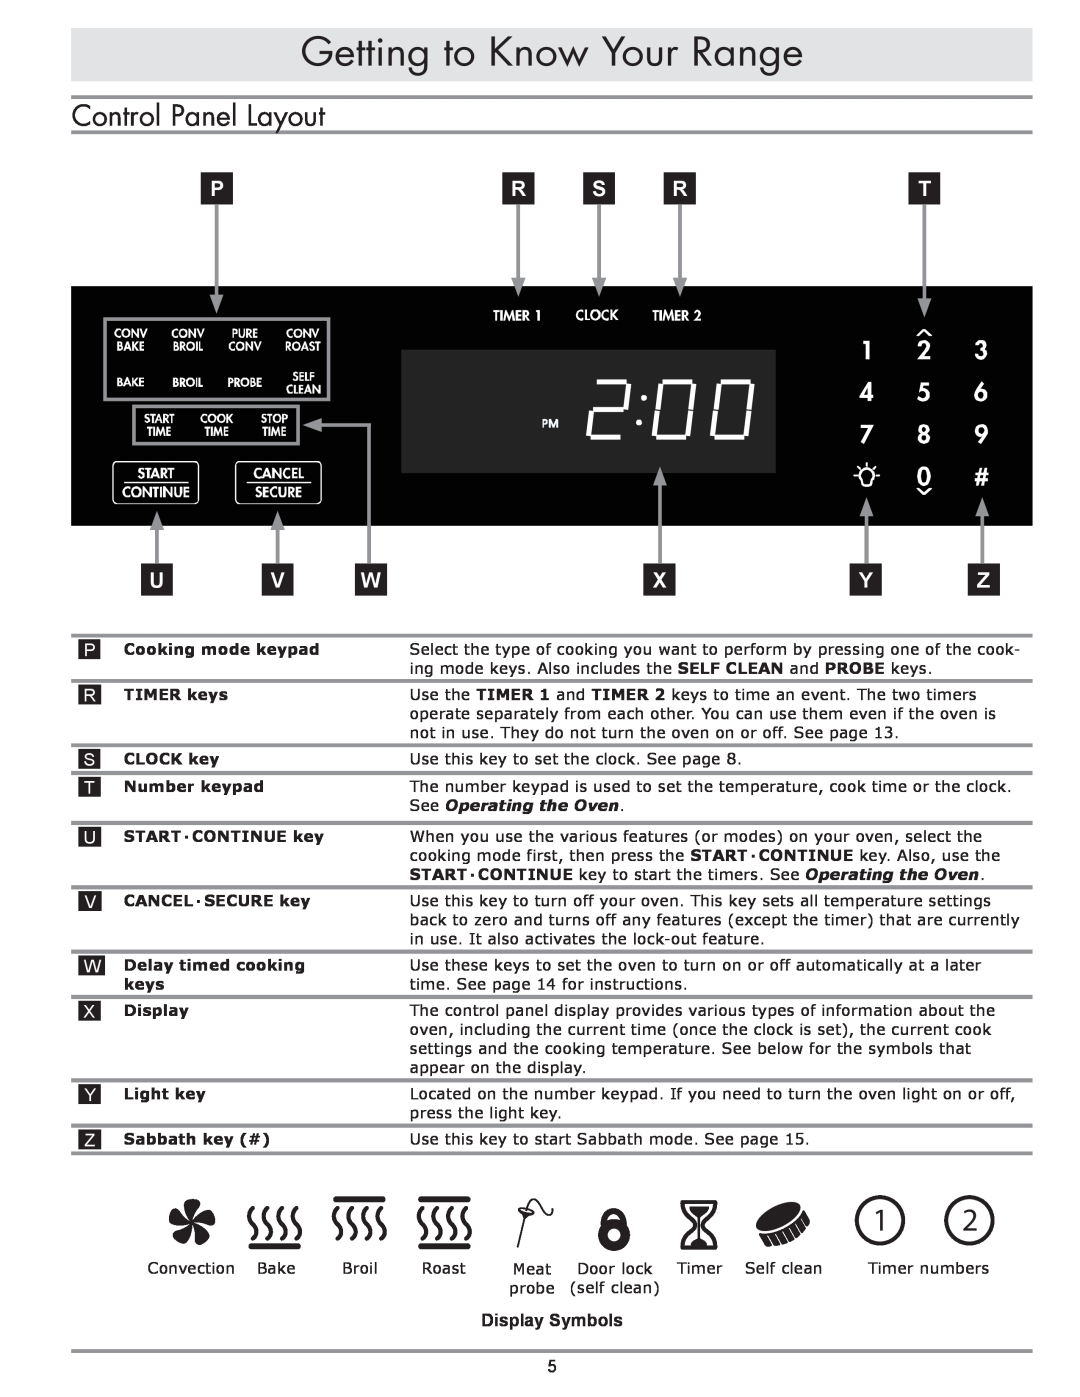 Dacor dacor important safety instructions Control Panel Layout, Getting to Know Your Range 